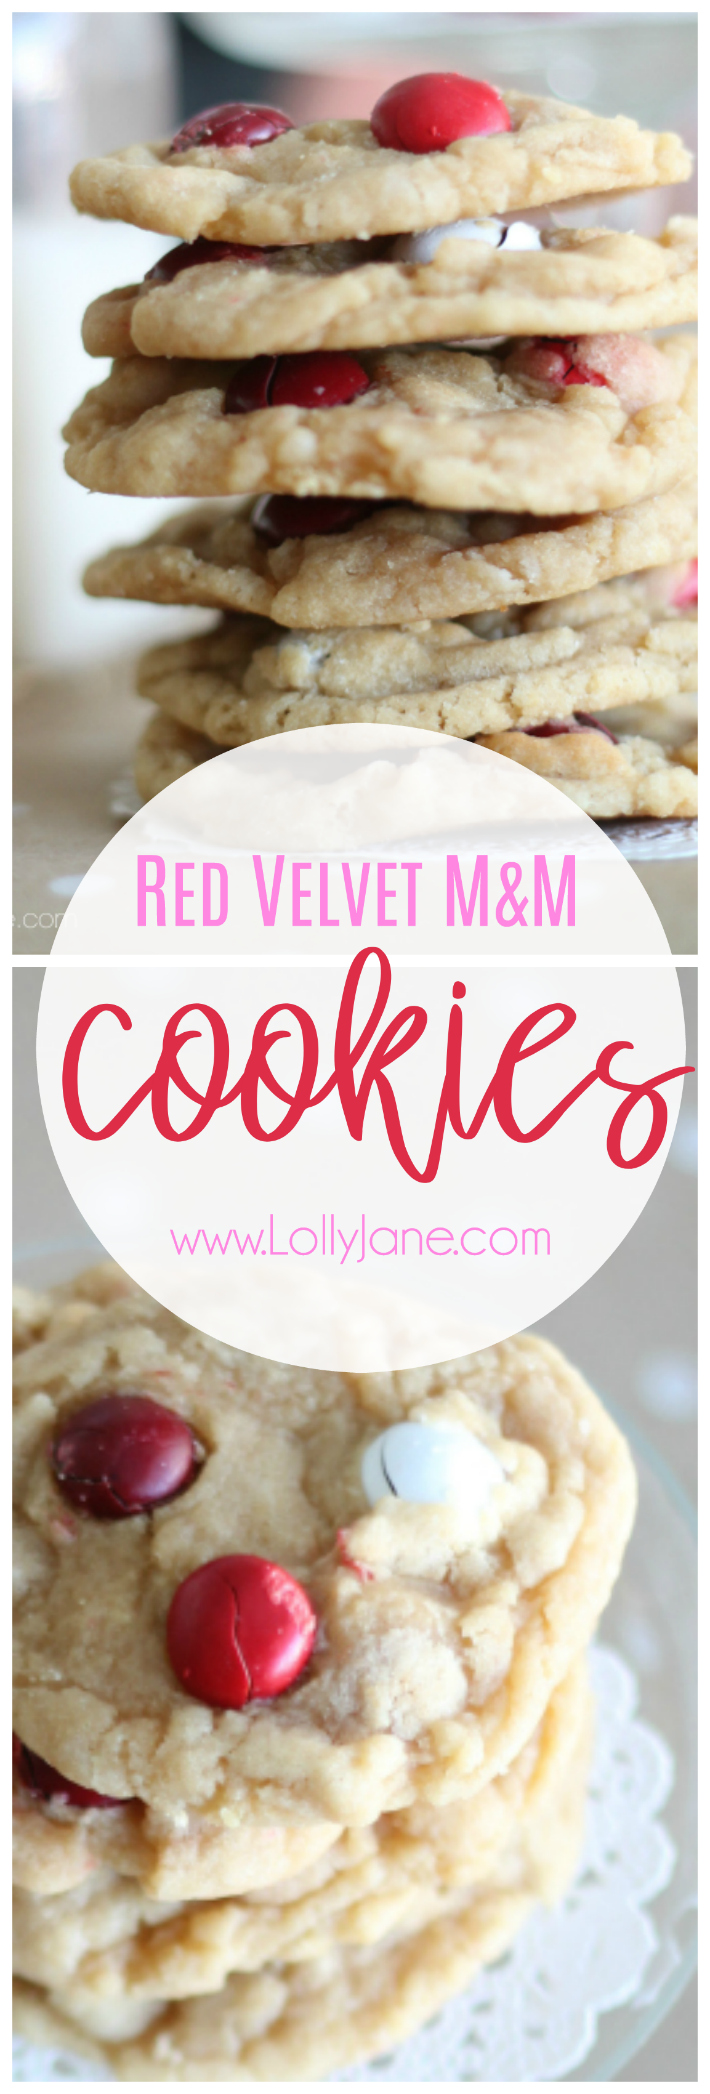 Such a yummy Red Velvet M&M cookie recipe. So easy to make! Love this simple Valentine's Day cookie recipe, super kid friendly cookies!